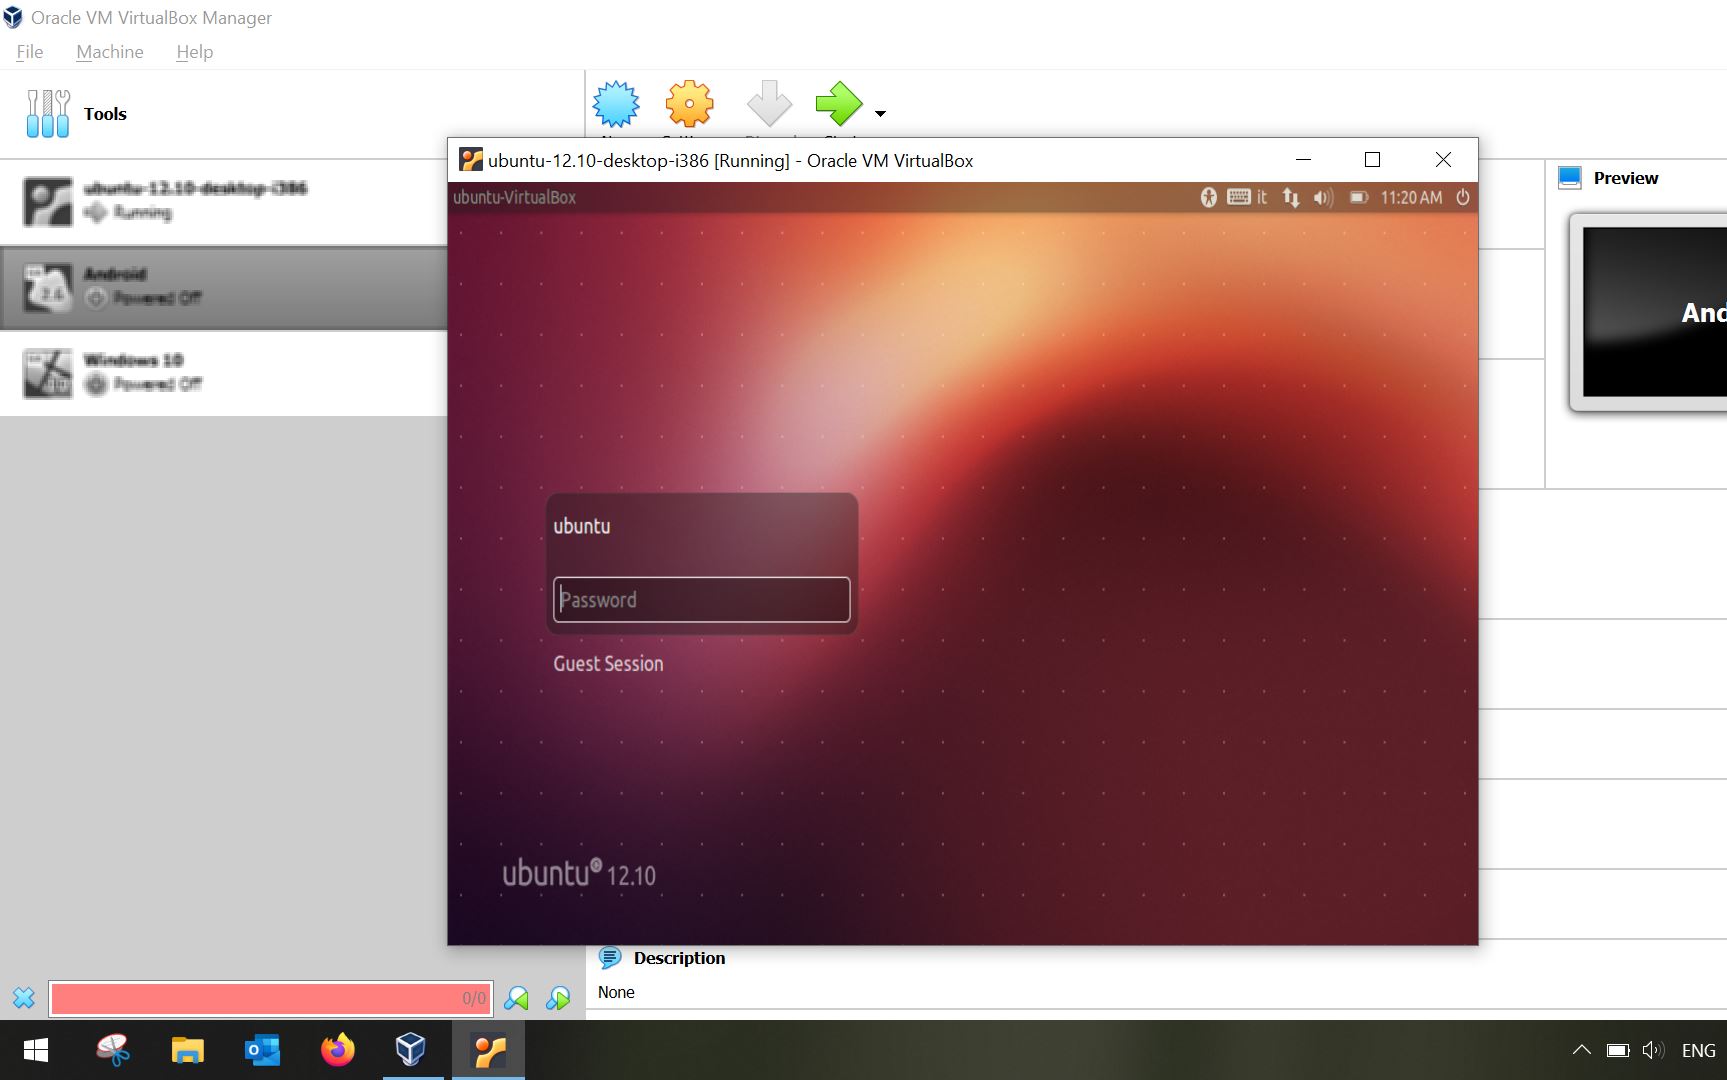 The virtual machine of ubuntu is running and asks you to log in to get started